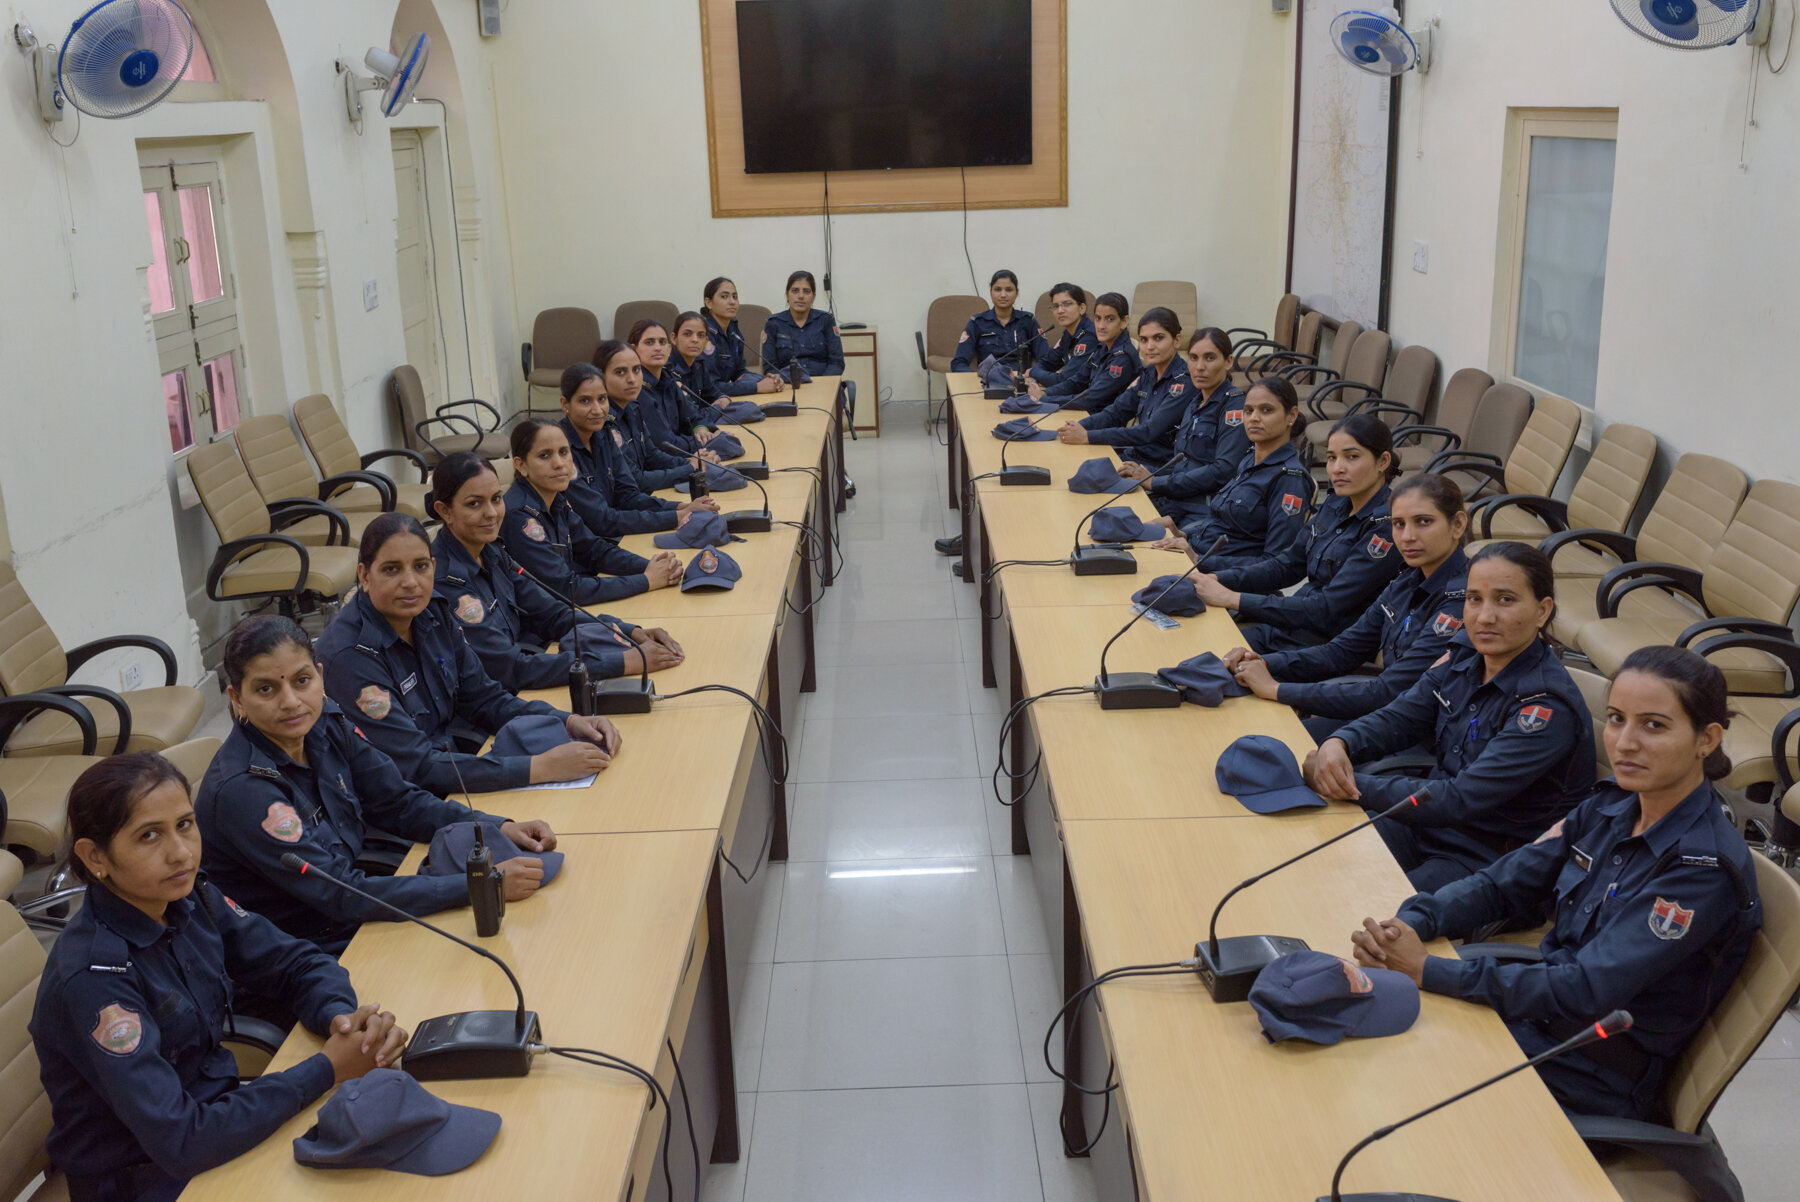  Members of the lady police patrol unit of Jaipur police during training at the Jaipur police commissionerate on 19th April, 2018. 